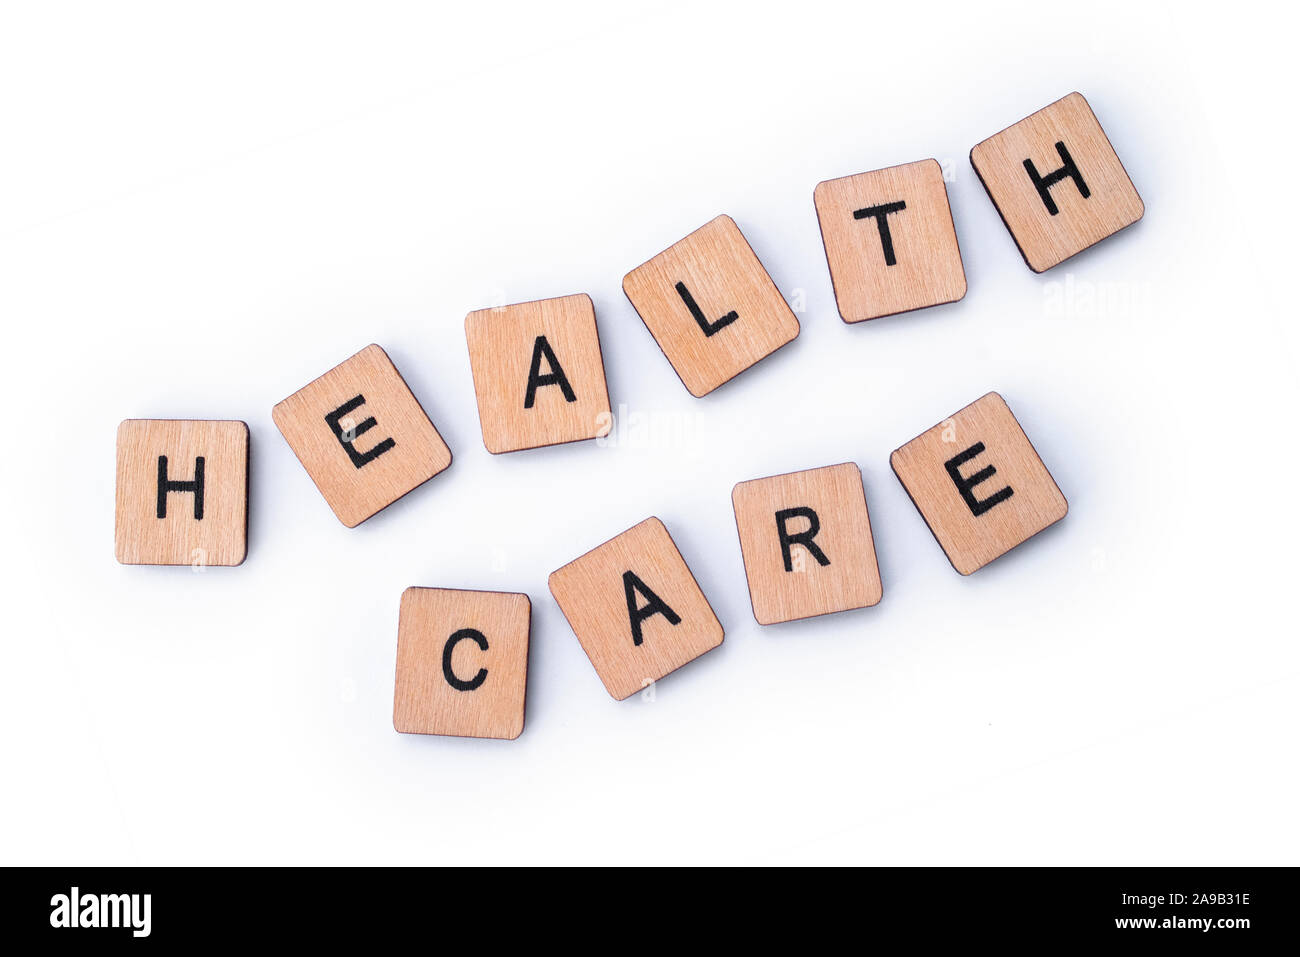 HEALTH CARE, spelt with wooden letter tiles. Stock Photo